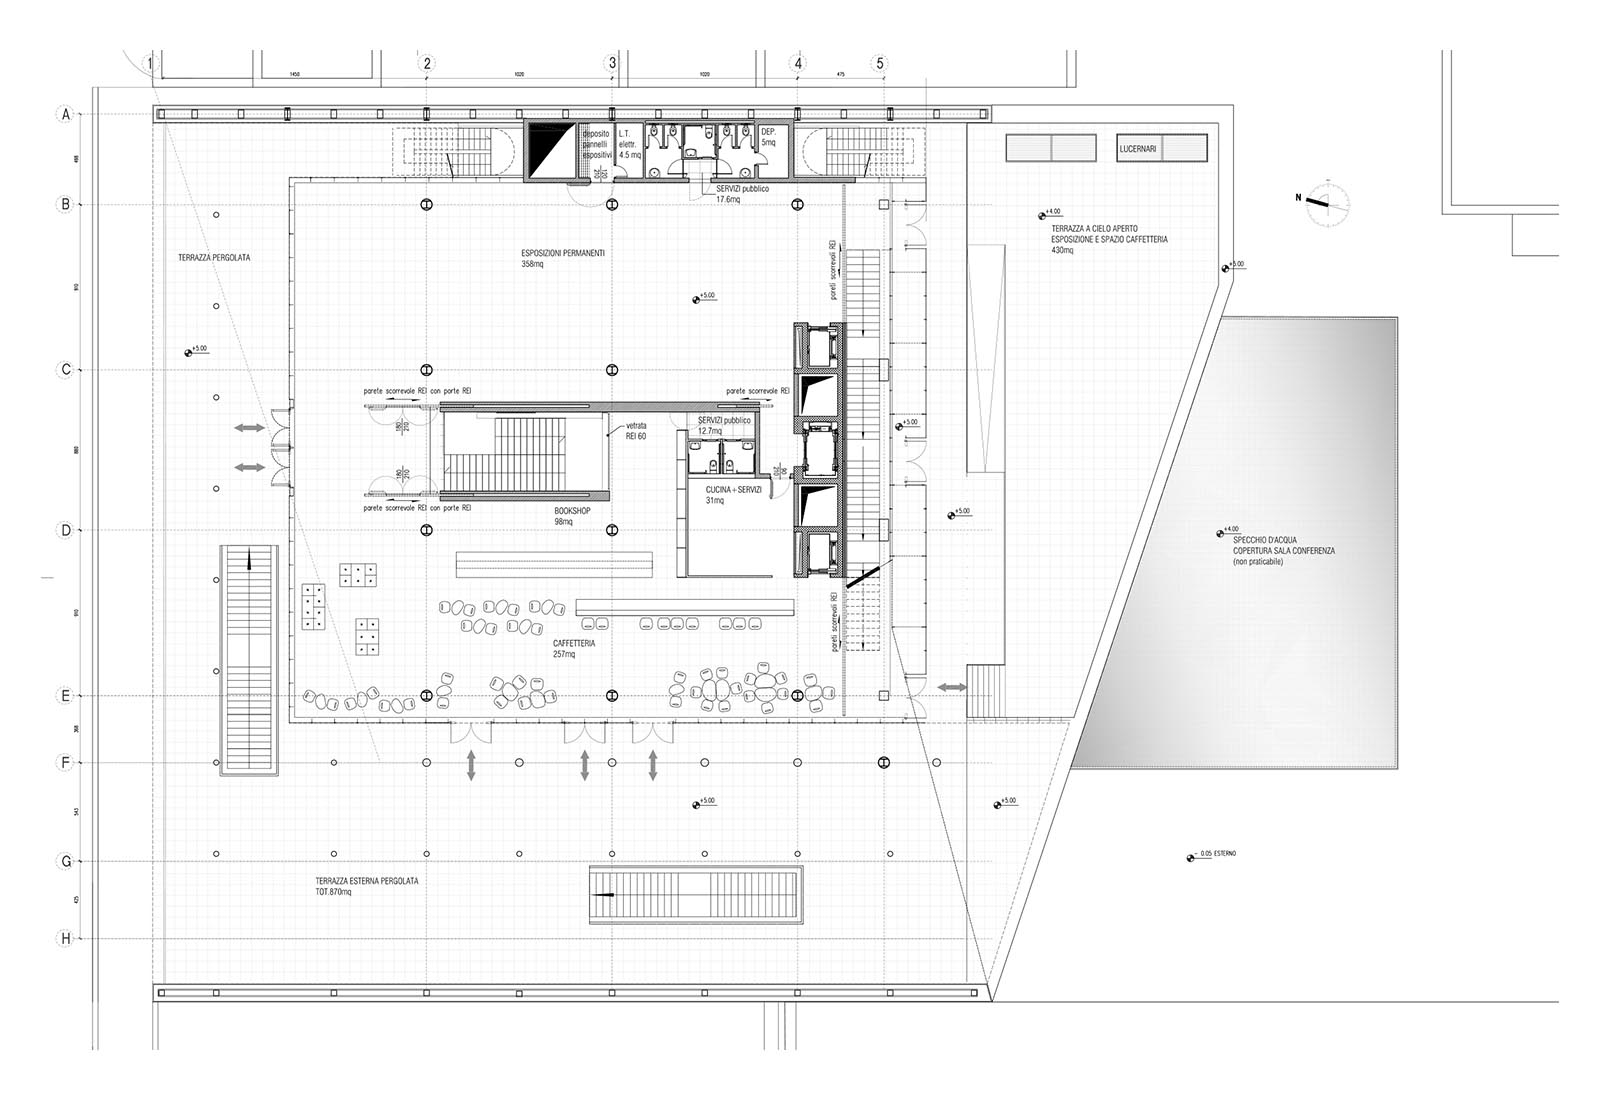 Science and technology museum in Rome - First floor plan